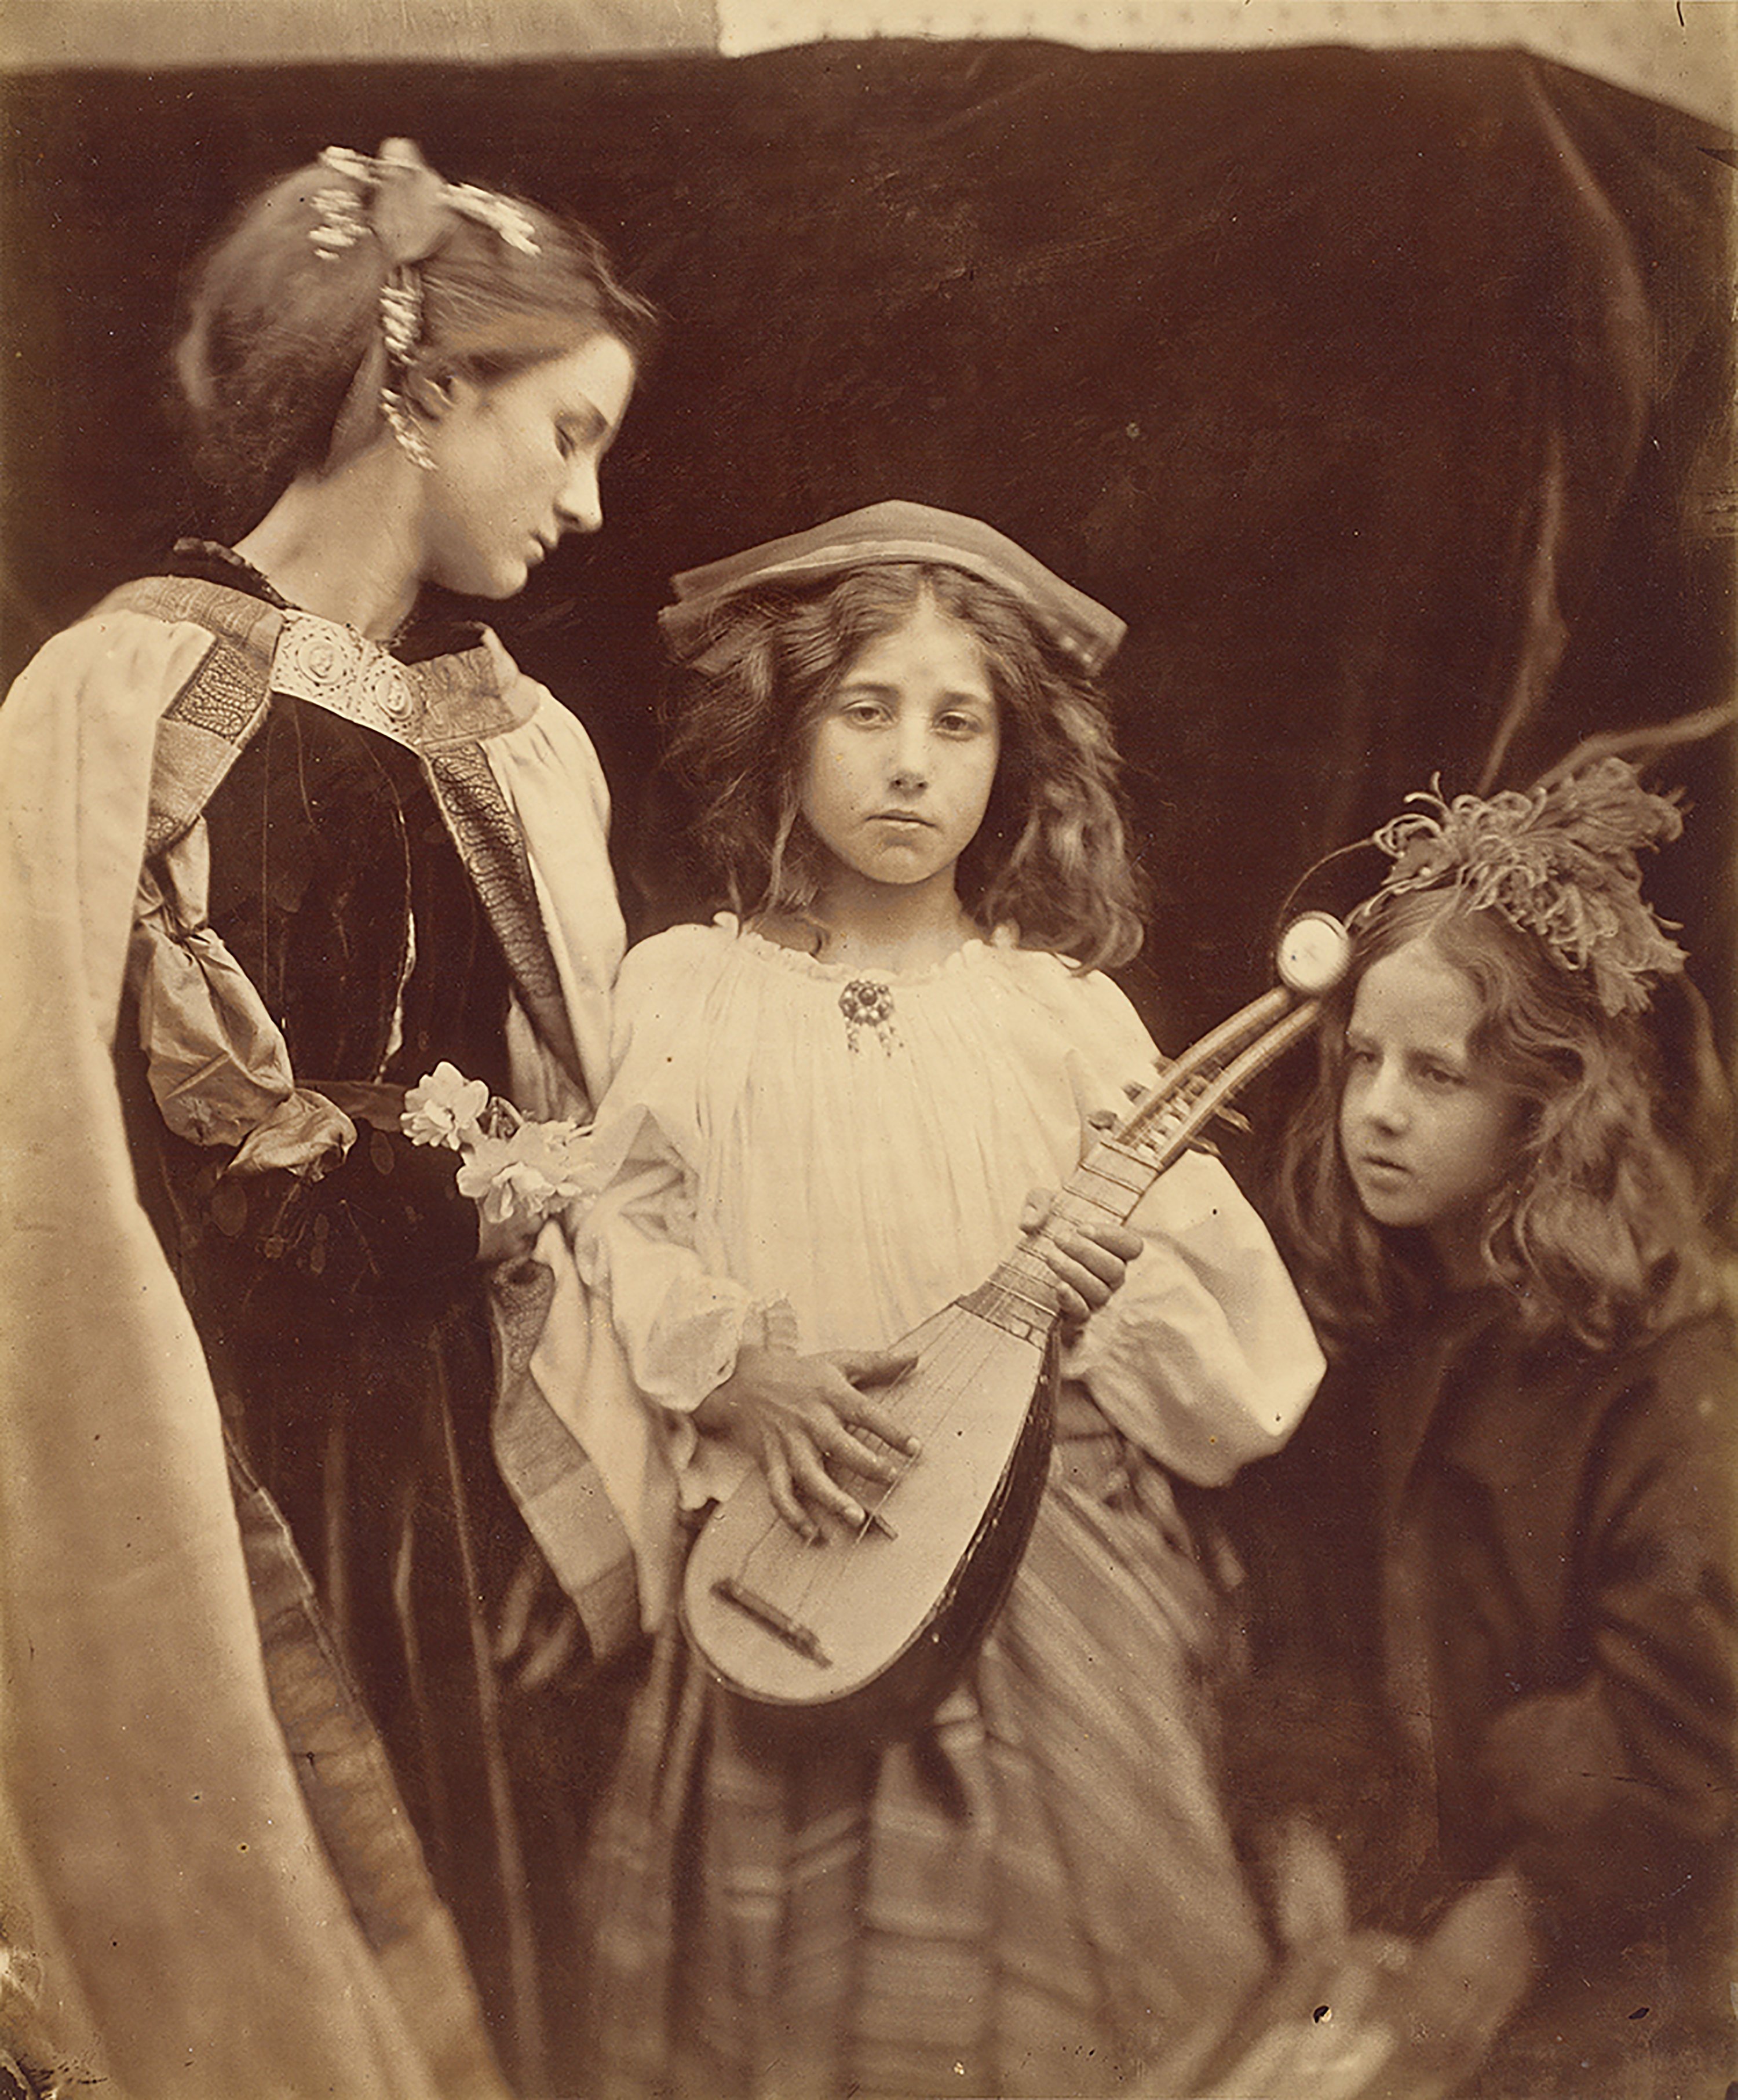 Julia Margaret Cameron’s “A Minstrel Group” Courtesy of National Gallery of Art.